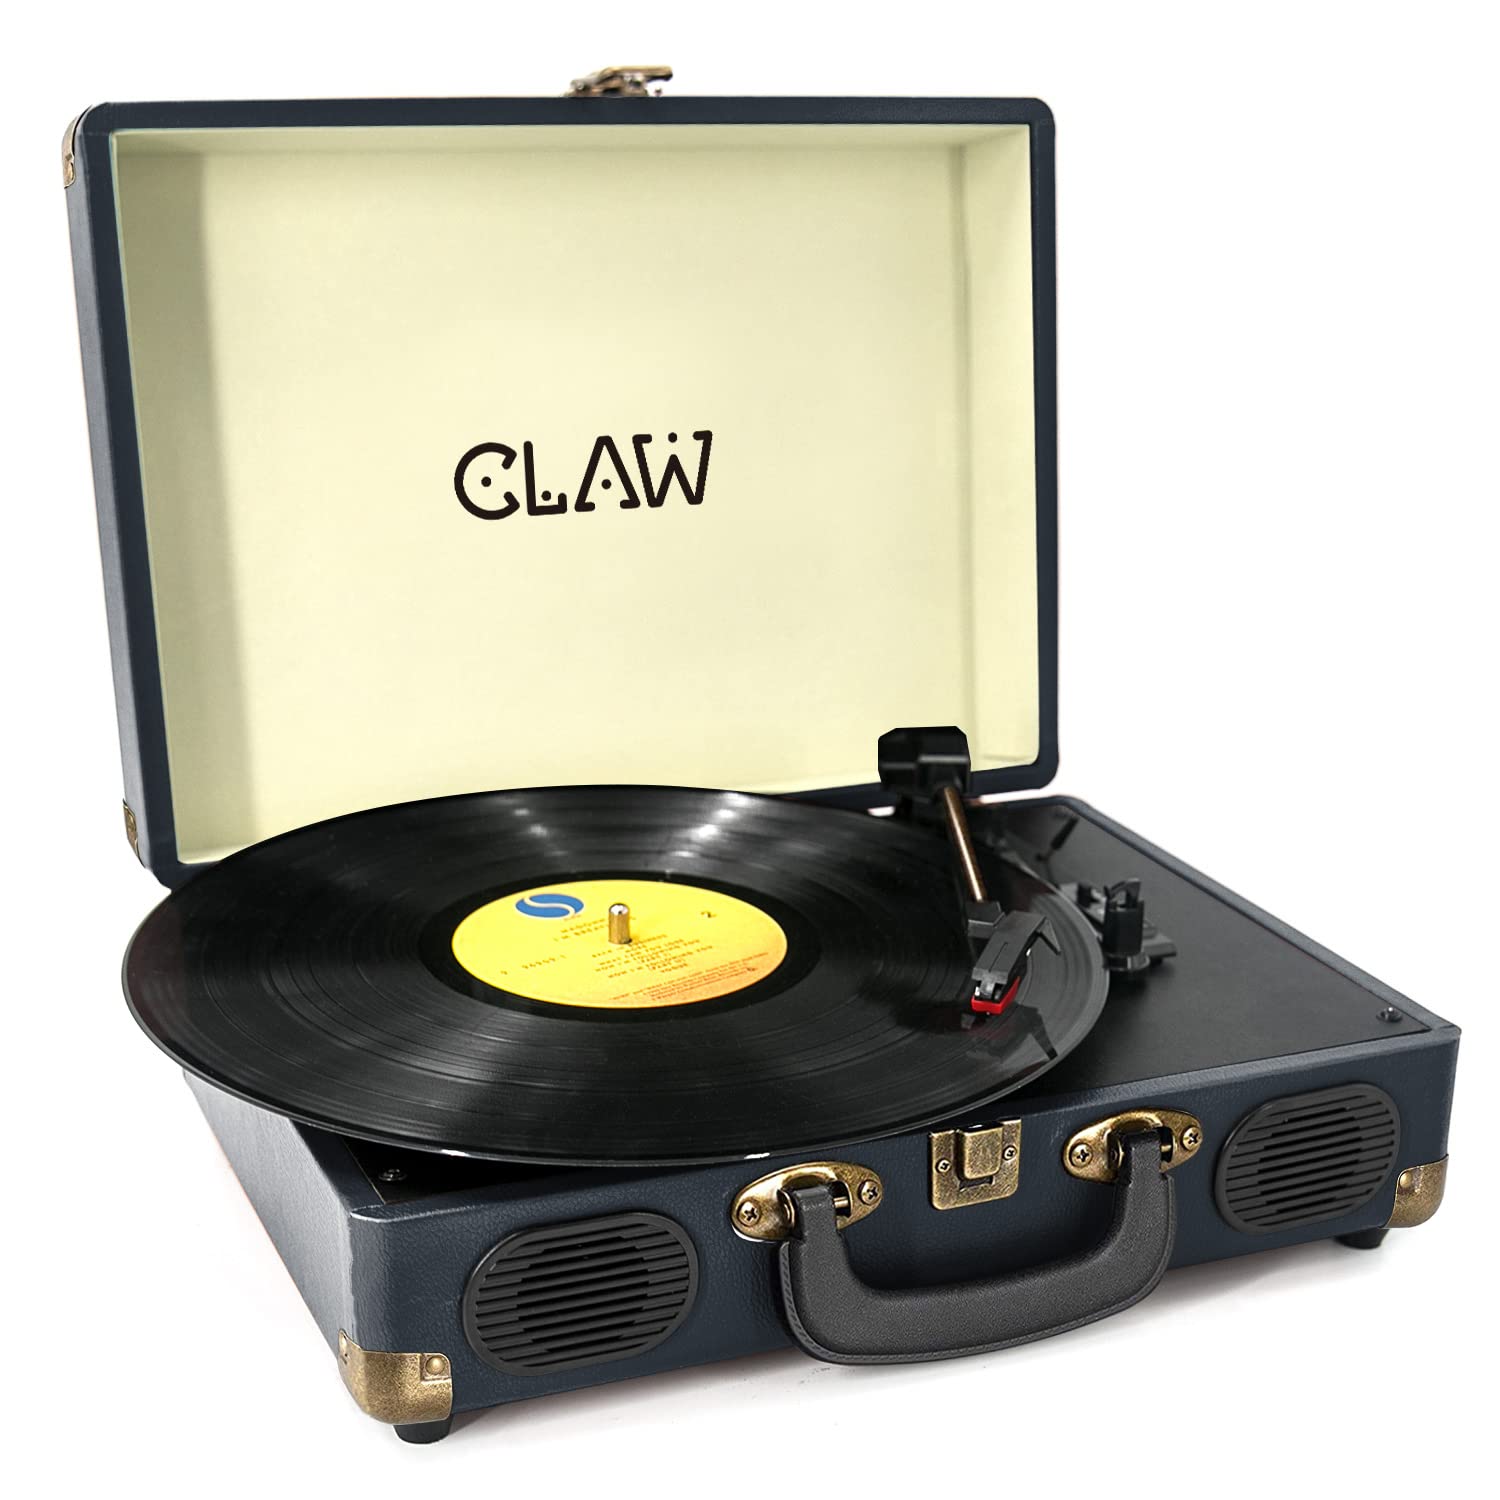 CLAW Stag Portable - Turntable with Built-in Stereo Speakers (Dark Blue) (Use Code Origin5 to Get 5% Discount)